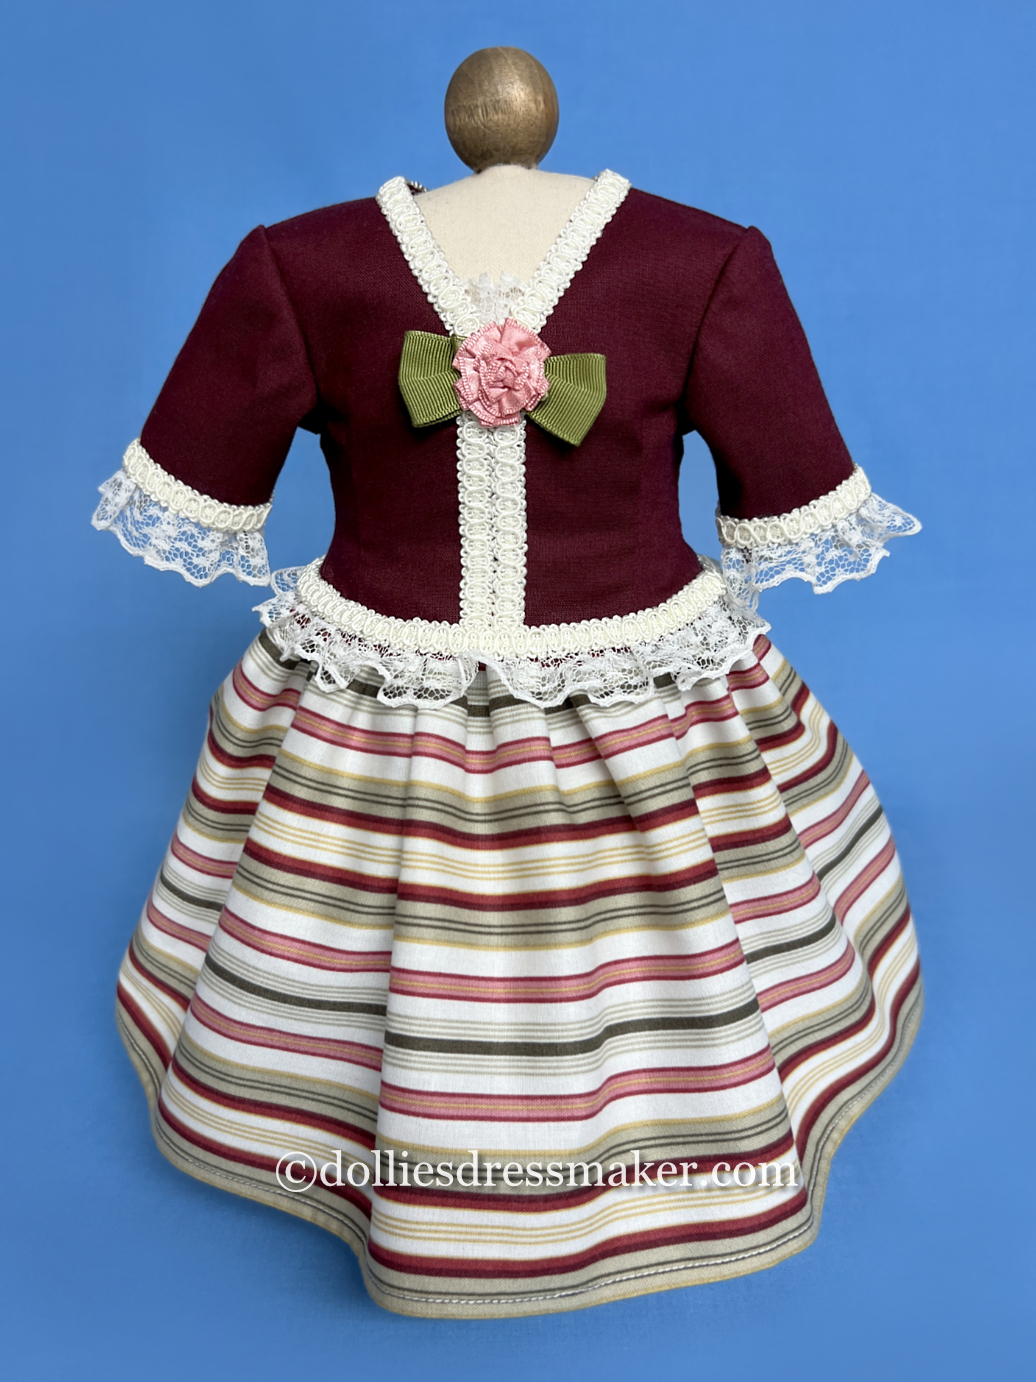 Two-Piece Dress | American Girl doll Marie-Grace • Cecile